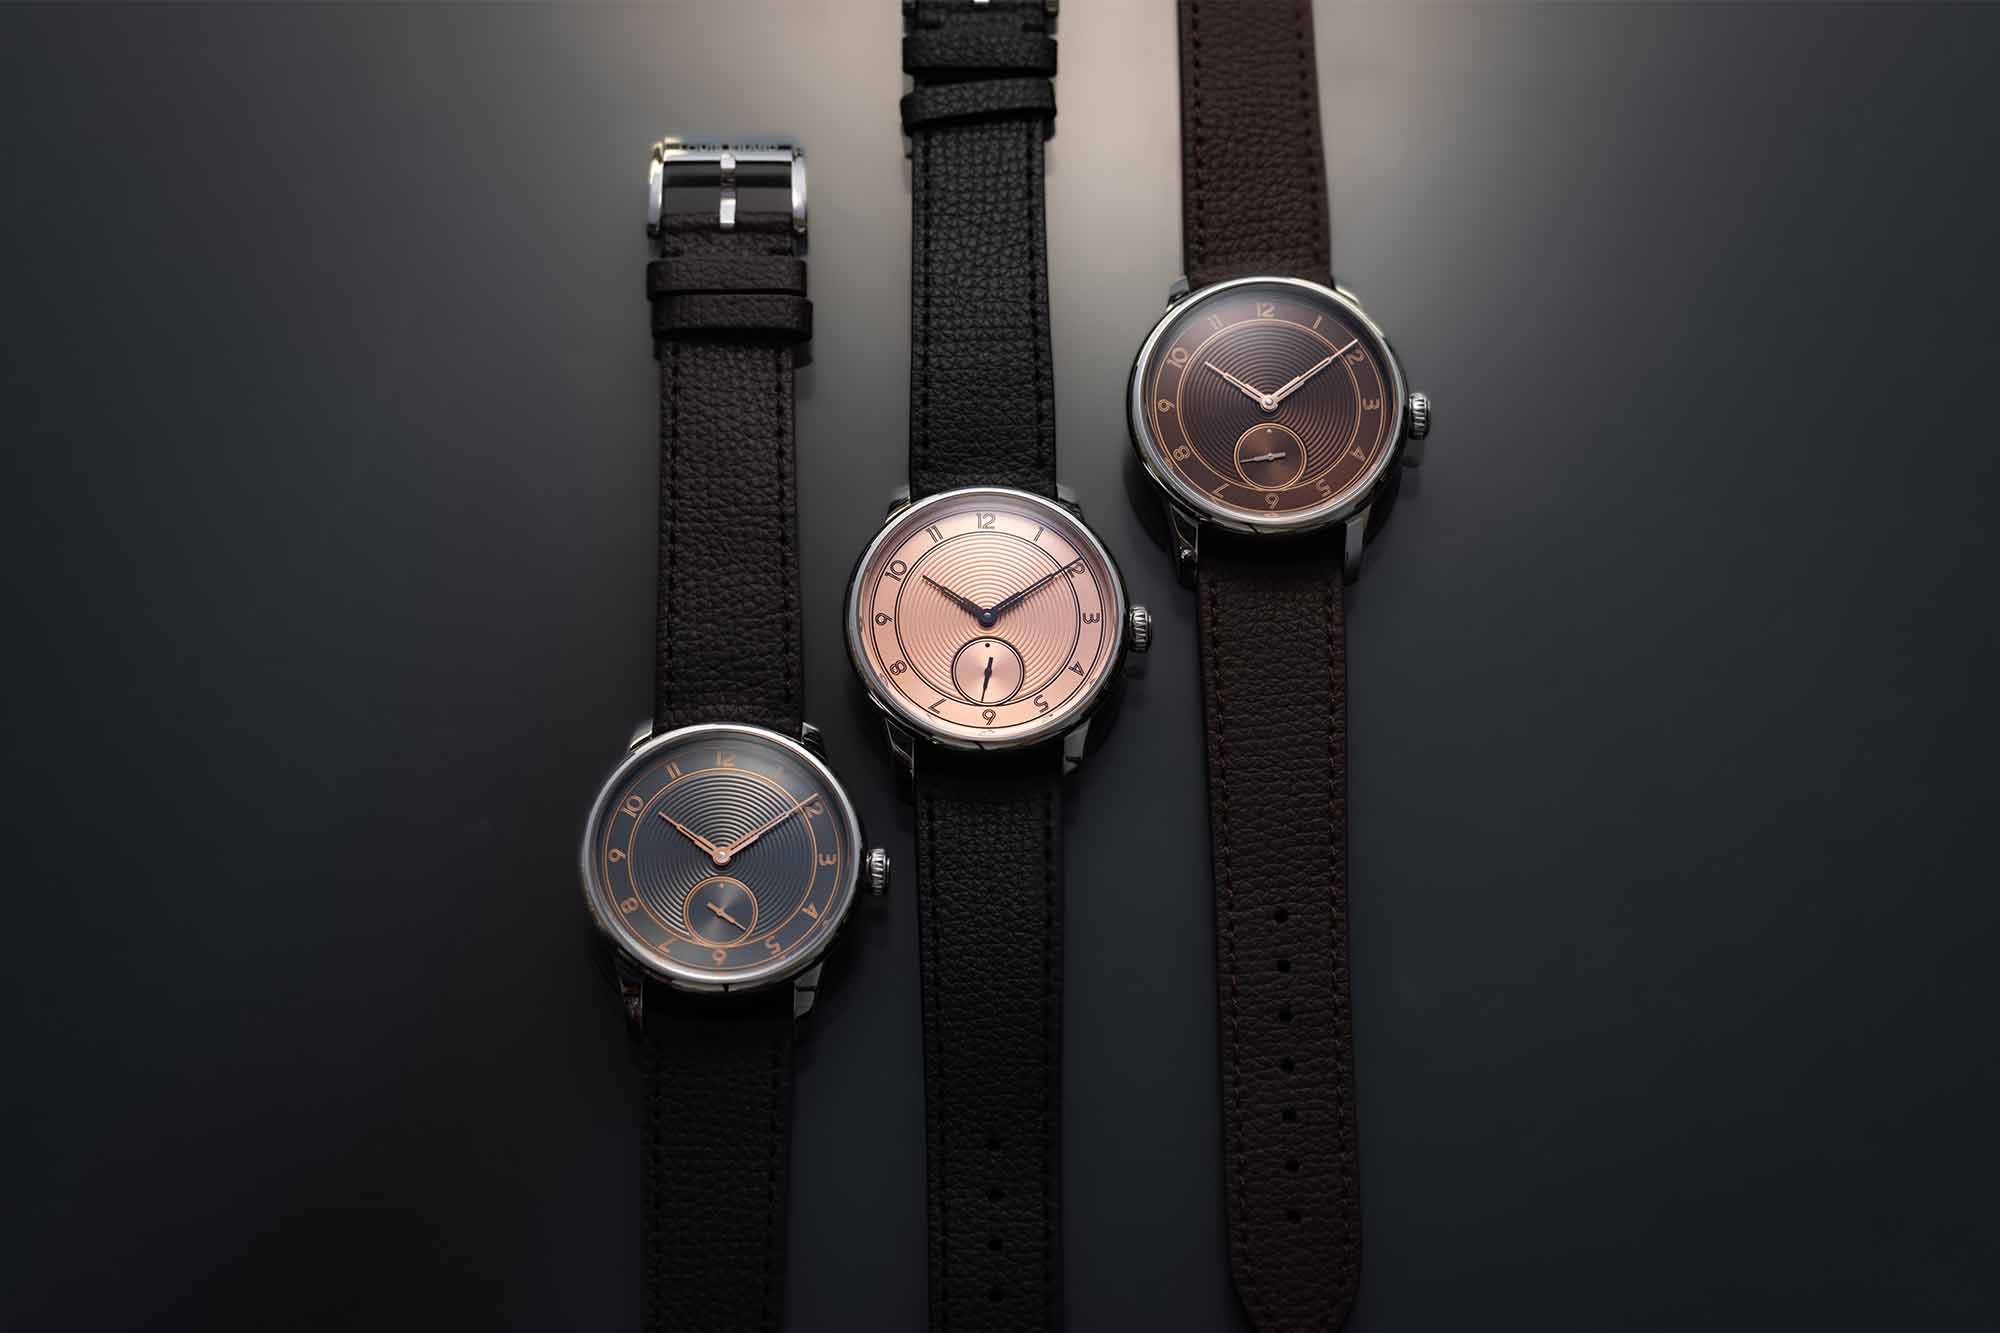 Louis Erard 1931 – Limited Edition - The Watch Guide